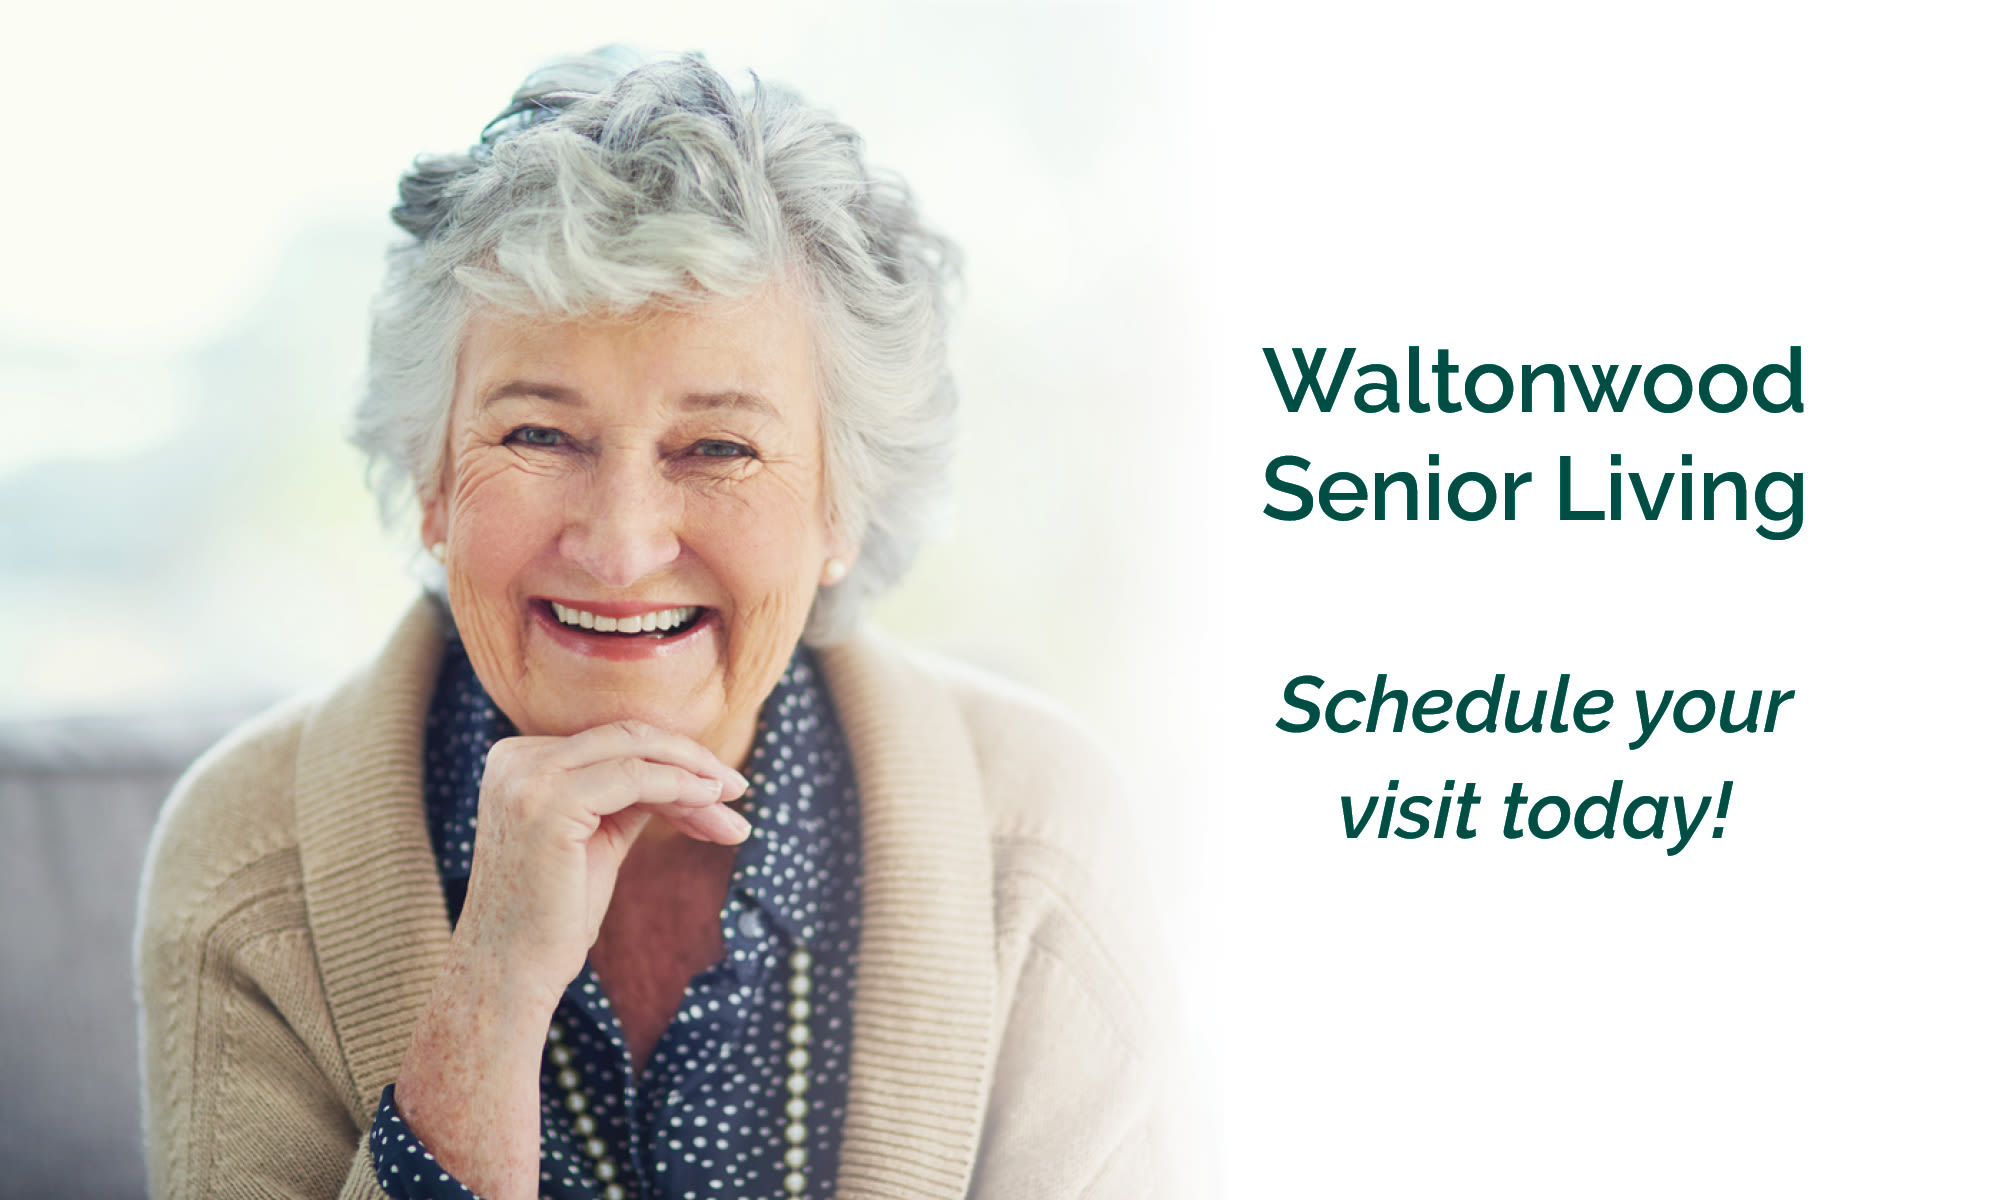 Schedule your visit today at Waltonwood in West Bloomfield, Michigan